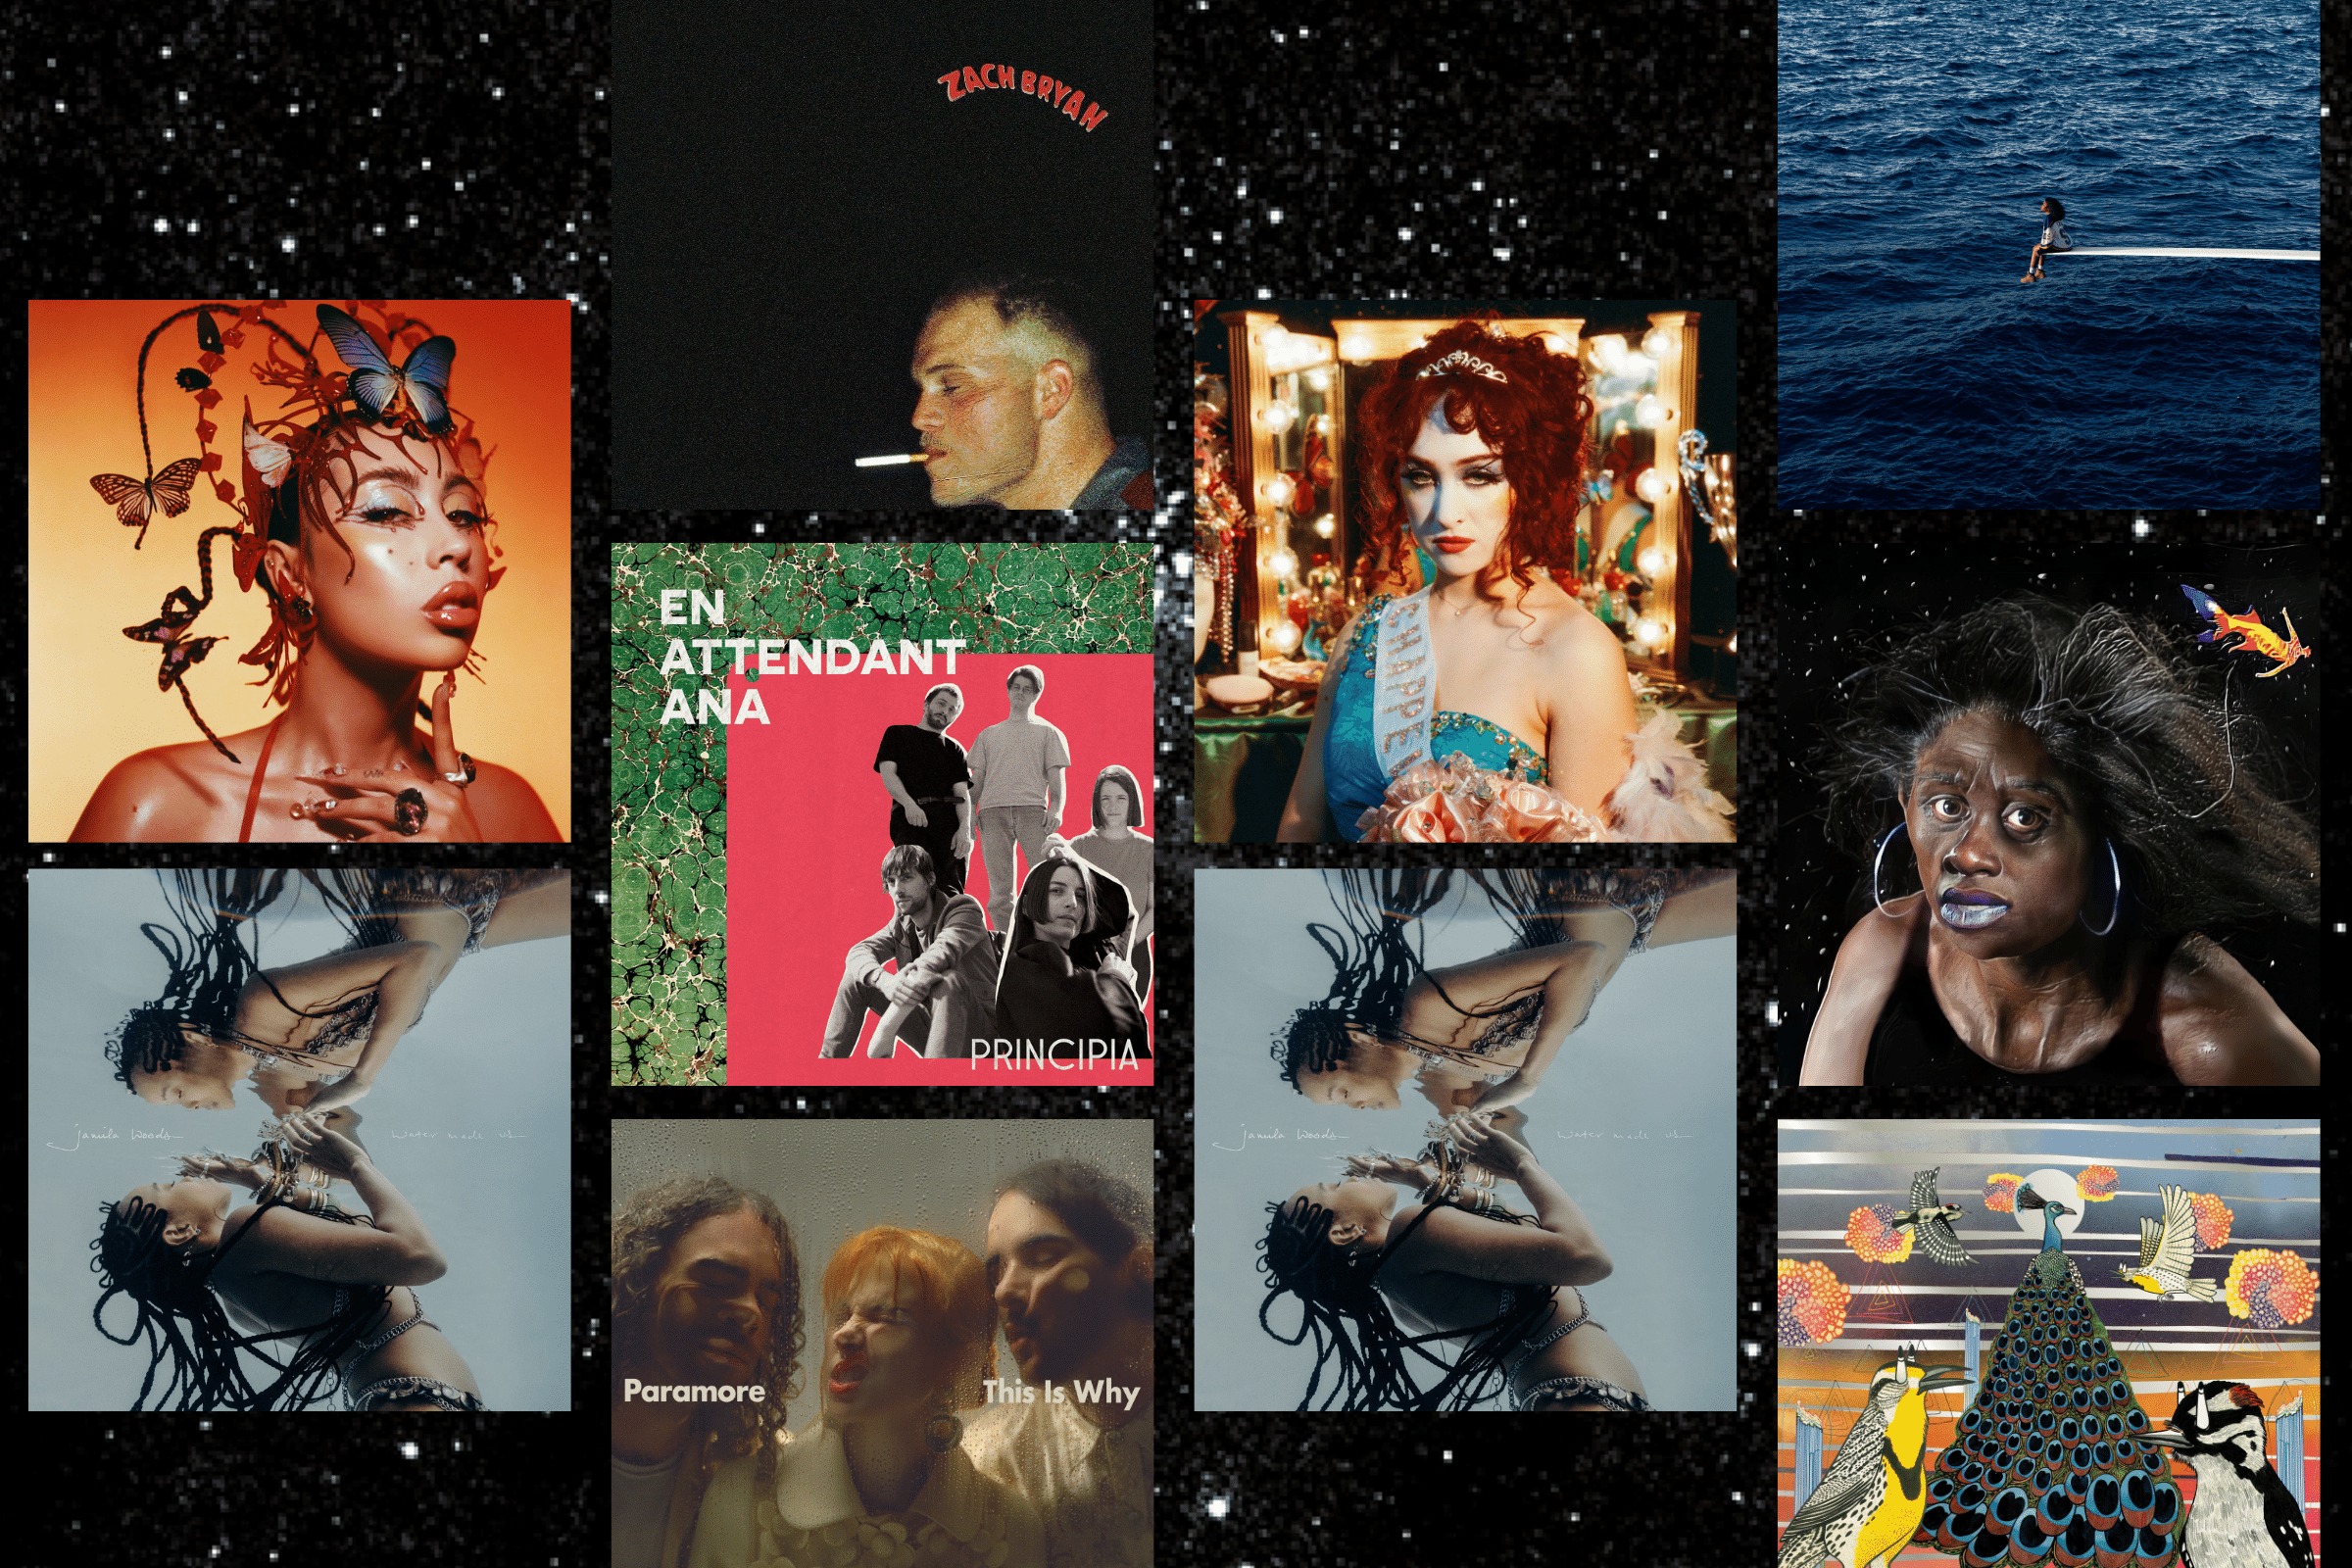 The 10 Best Albums of 2023